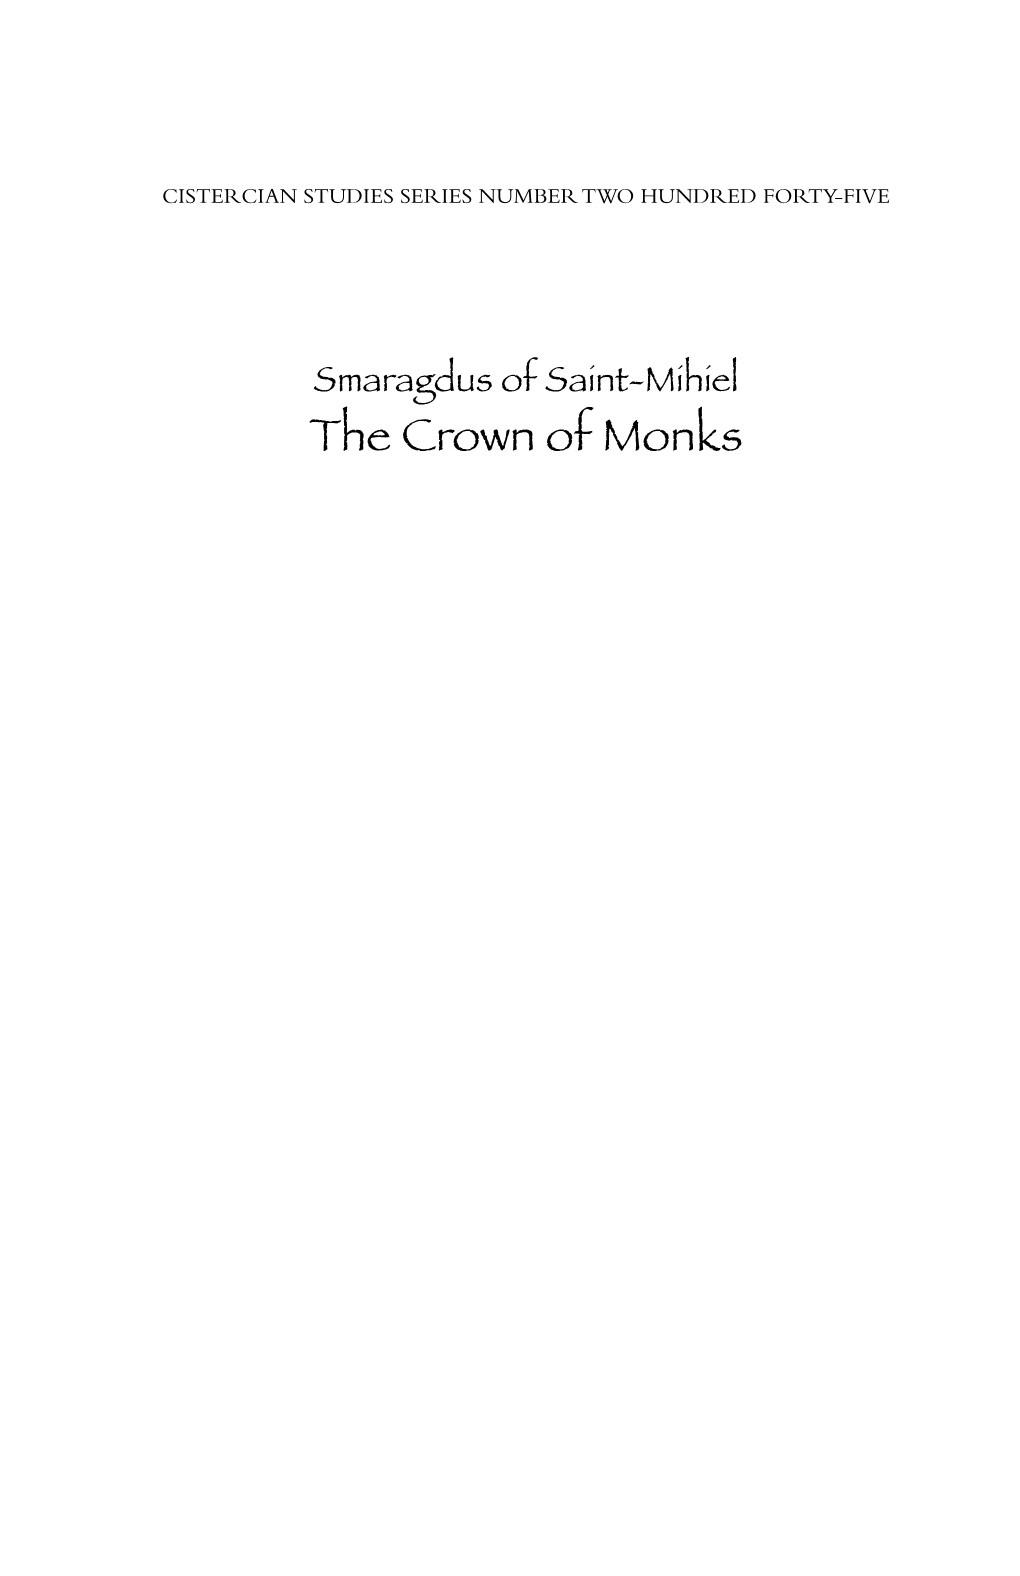 The Crown of Monks Cistercian Studies Series Number Two Hundred Forty-Five